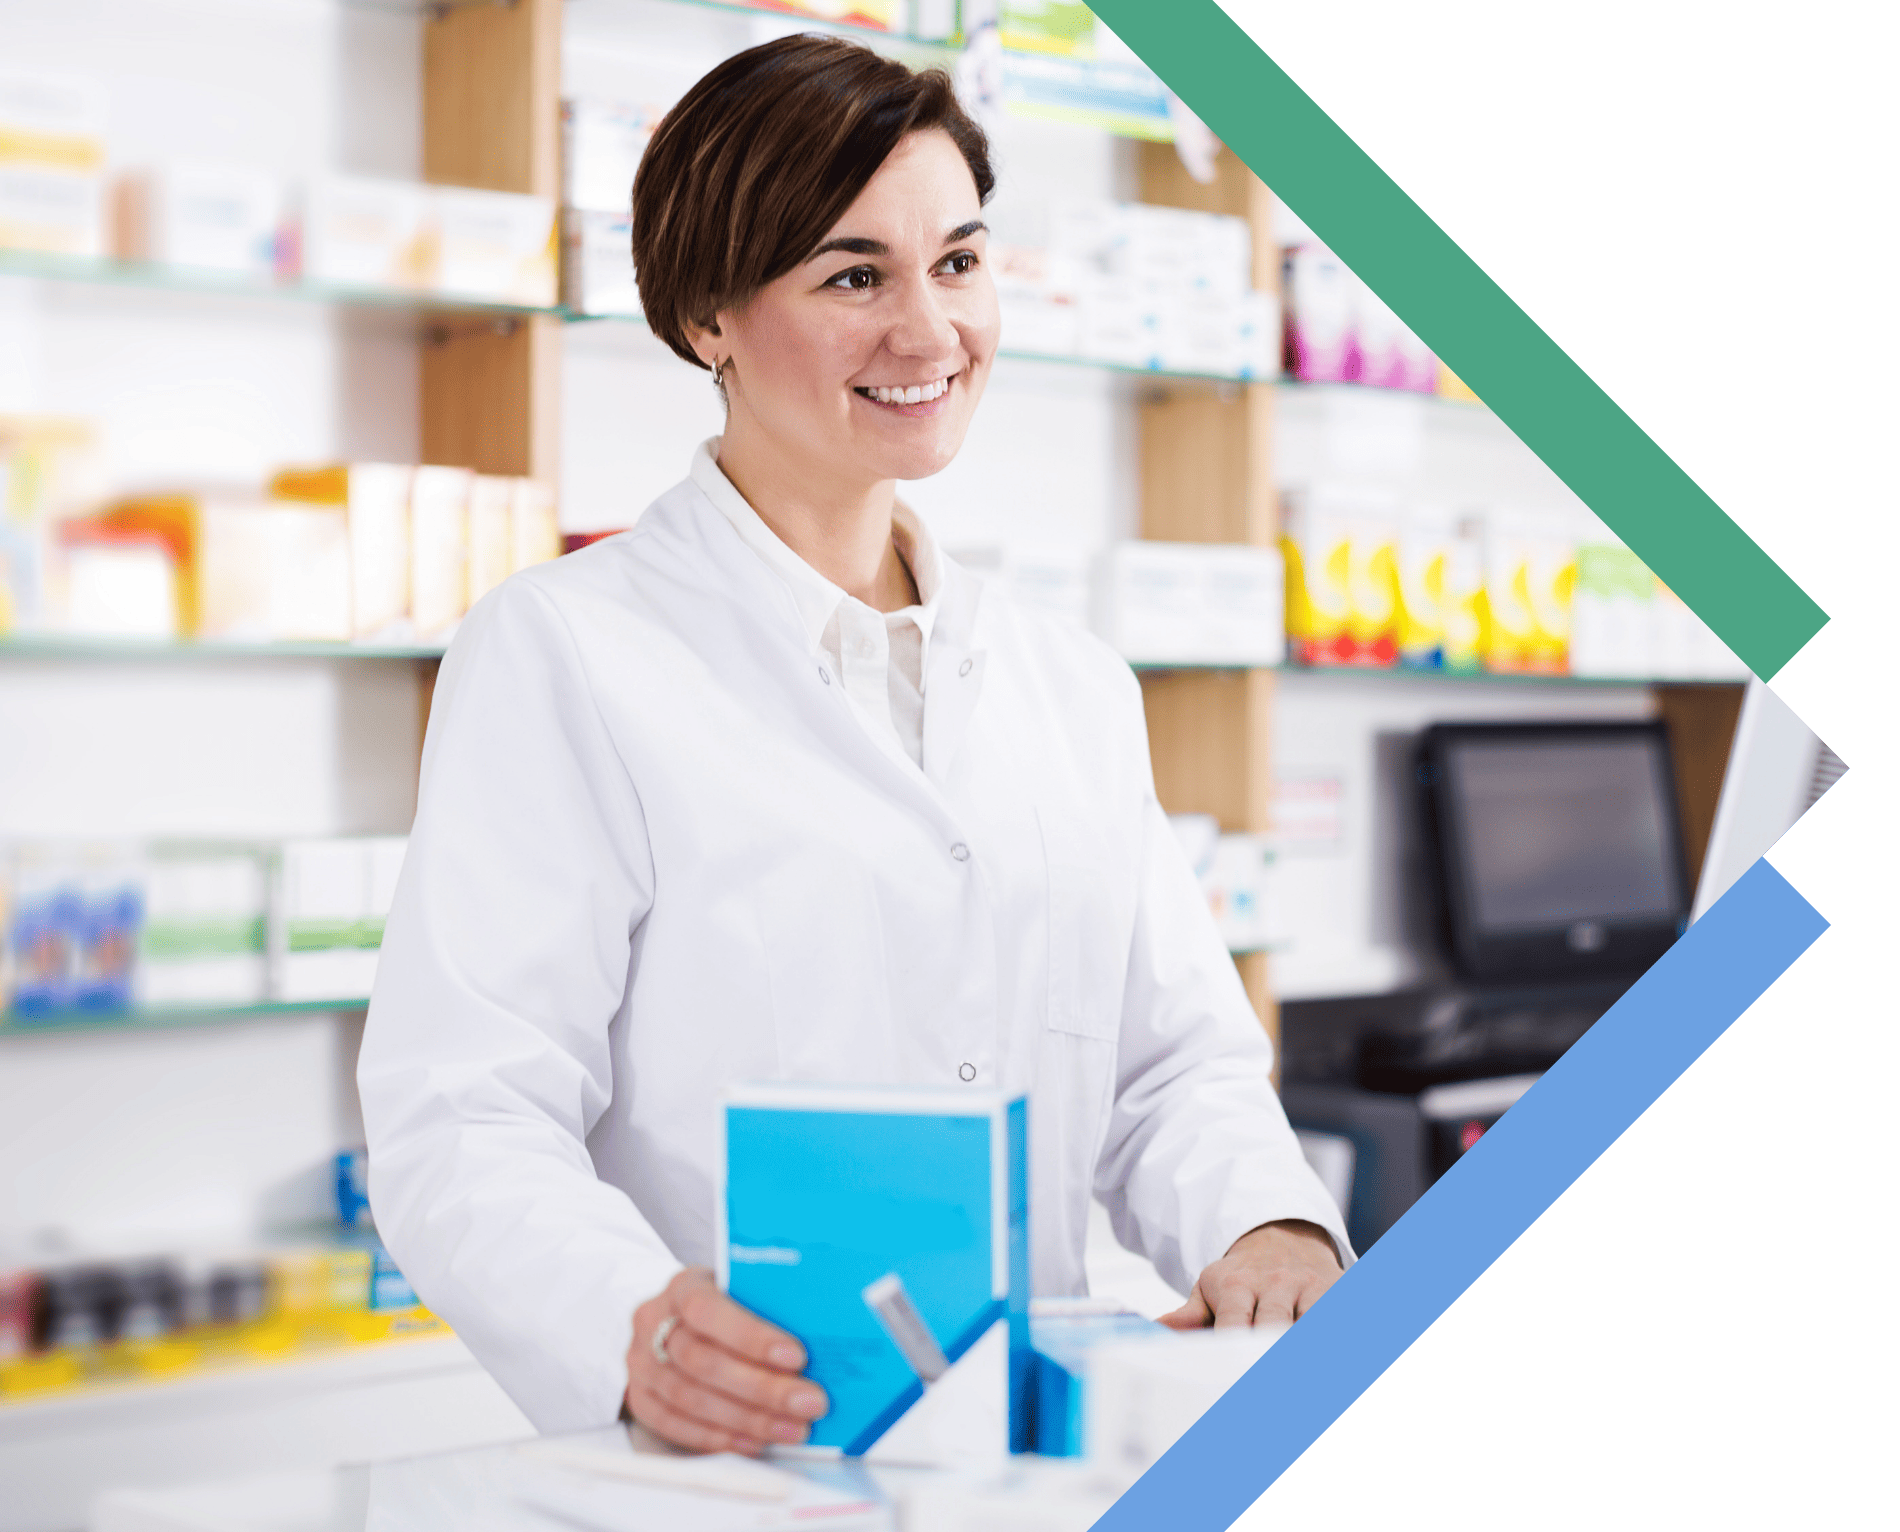 pharmacist smiling behind counter